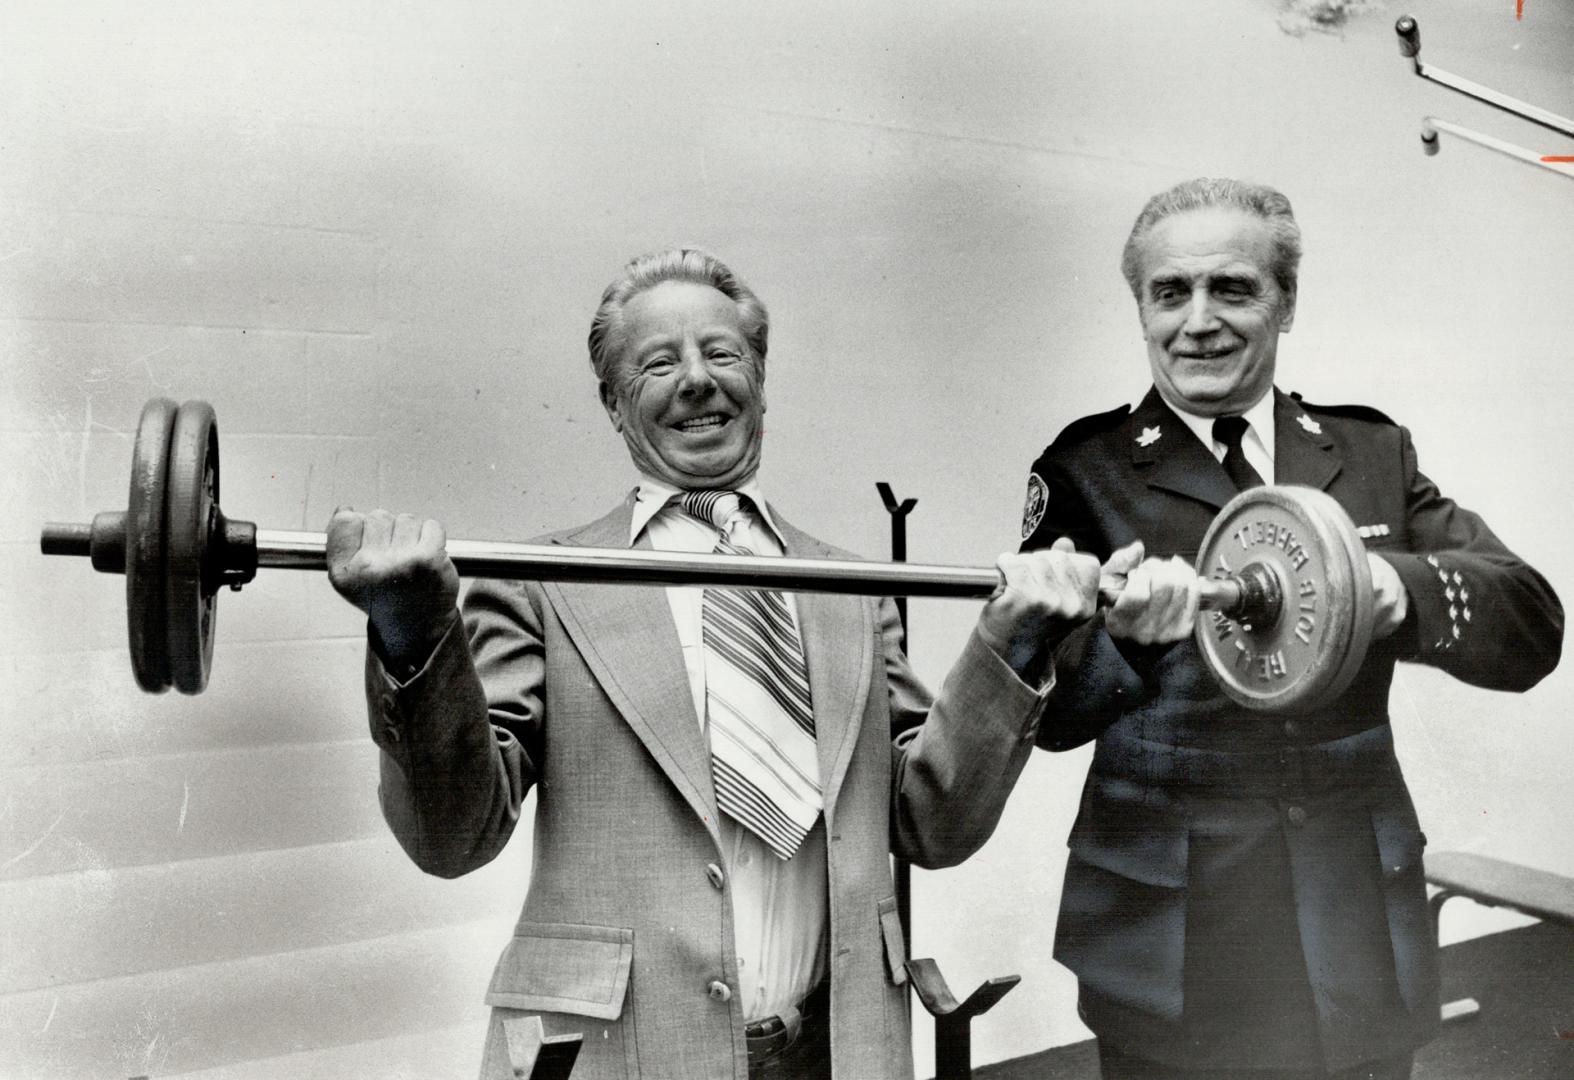 Mayor Gus Harris lifts 40-pound weights as Inspector Cyril Cole helps